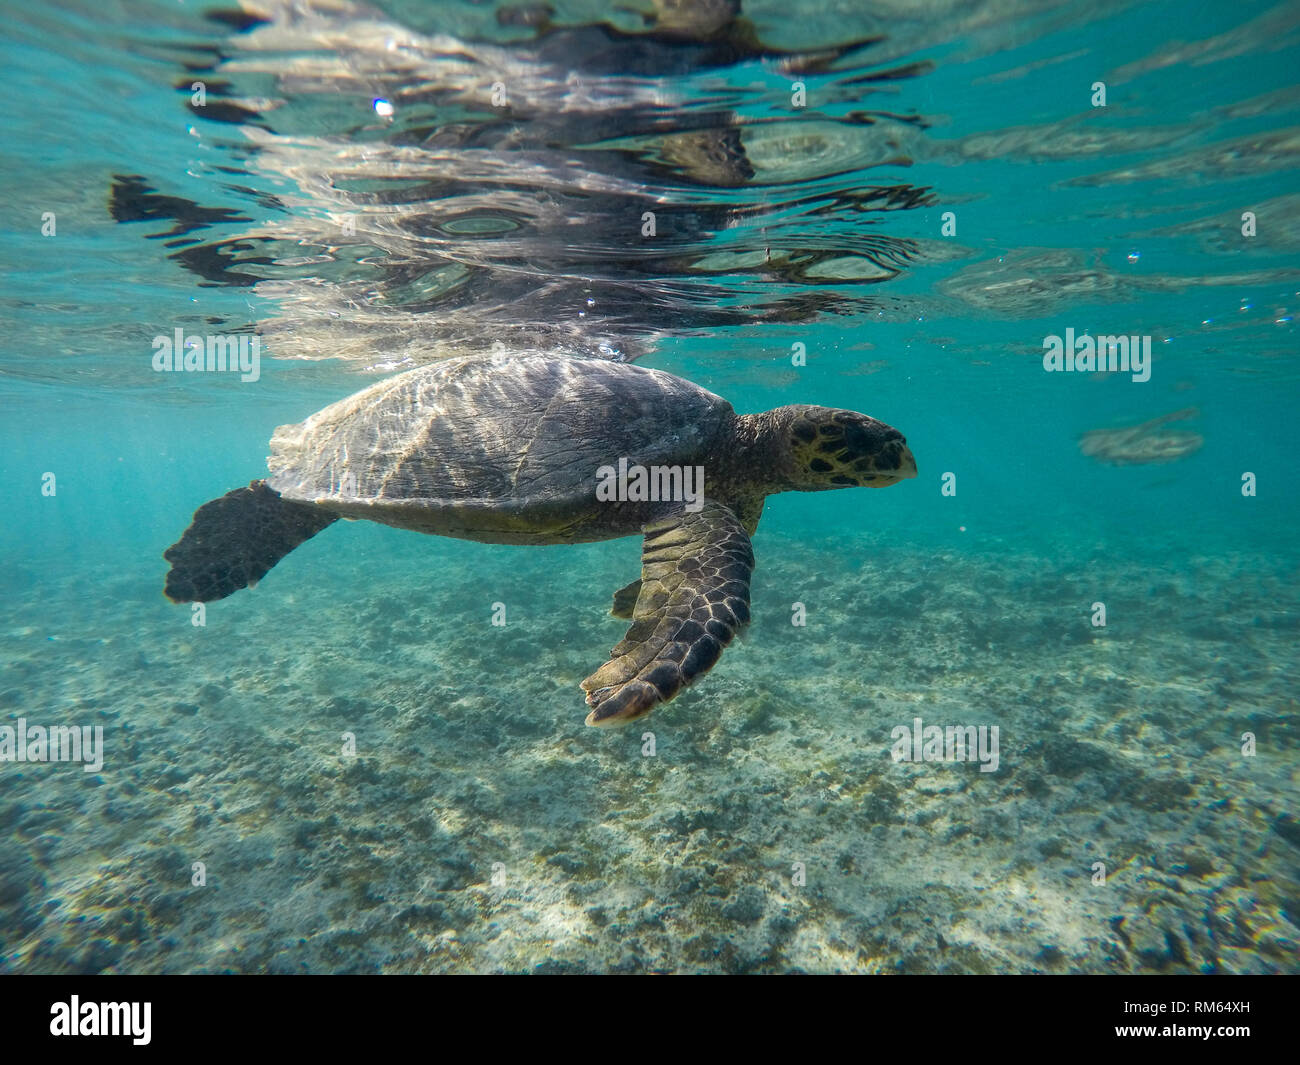 Hawksbill sea turtle (Eretmochelys imbricata). Only female adult turtles come ashore, doing so to lay their eggs. This is the smallest of the marine t Stock Photo